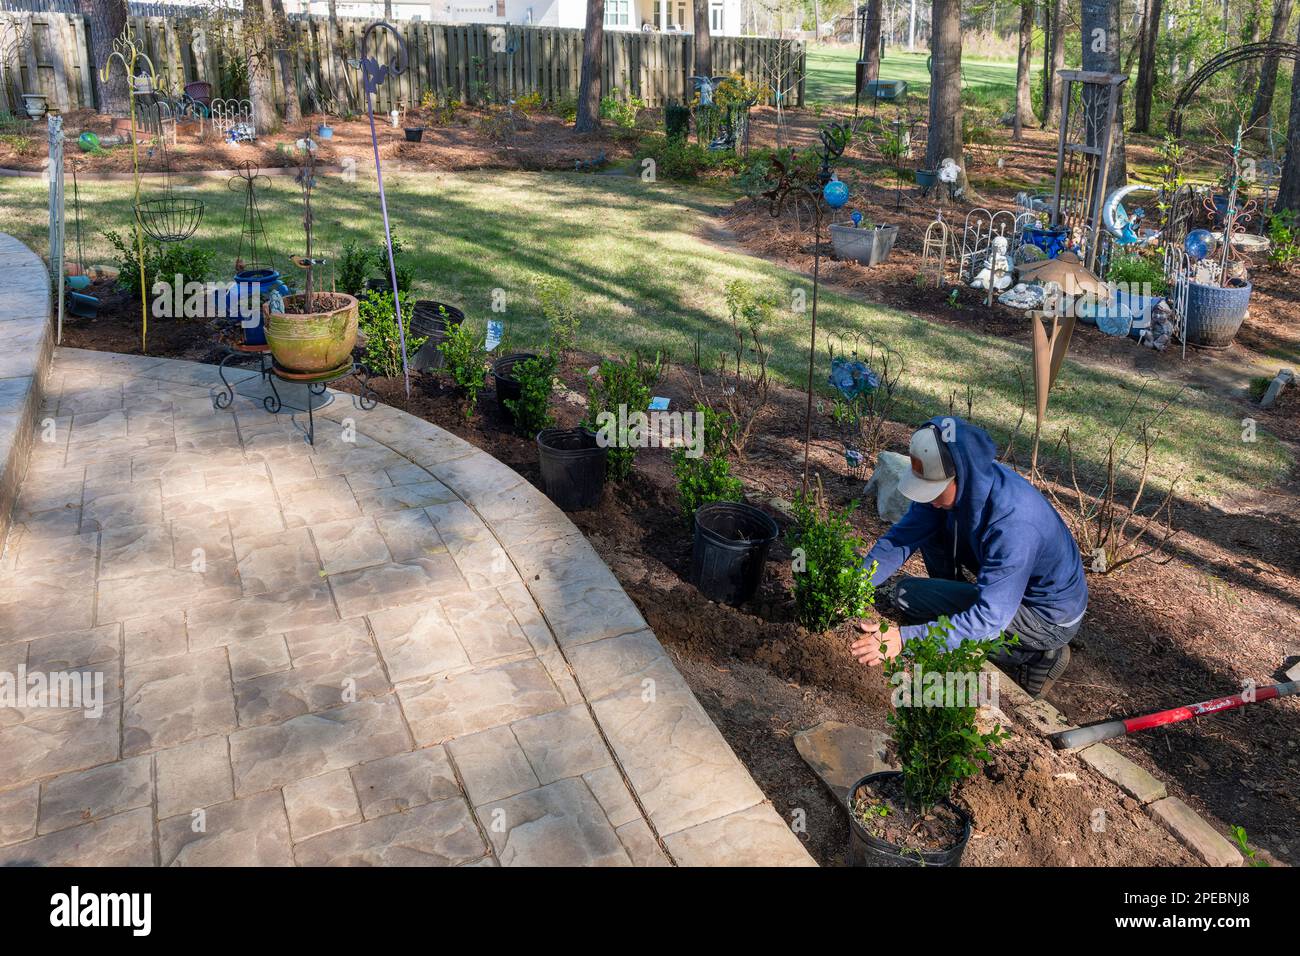 Young Hispanic boy or man doing landscaping work by planting bushes in a residential yard and garden in Alabama, USA. Stock Photo